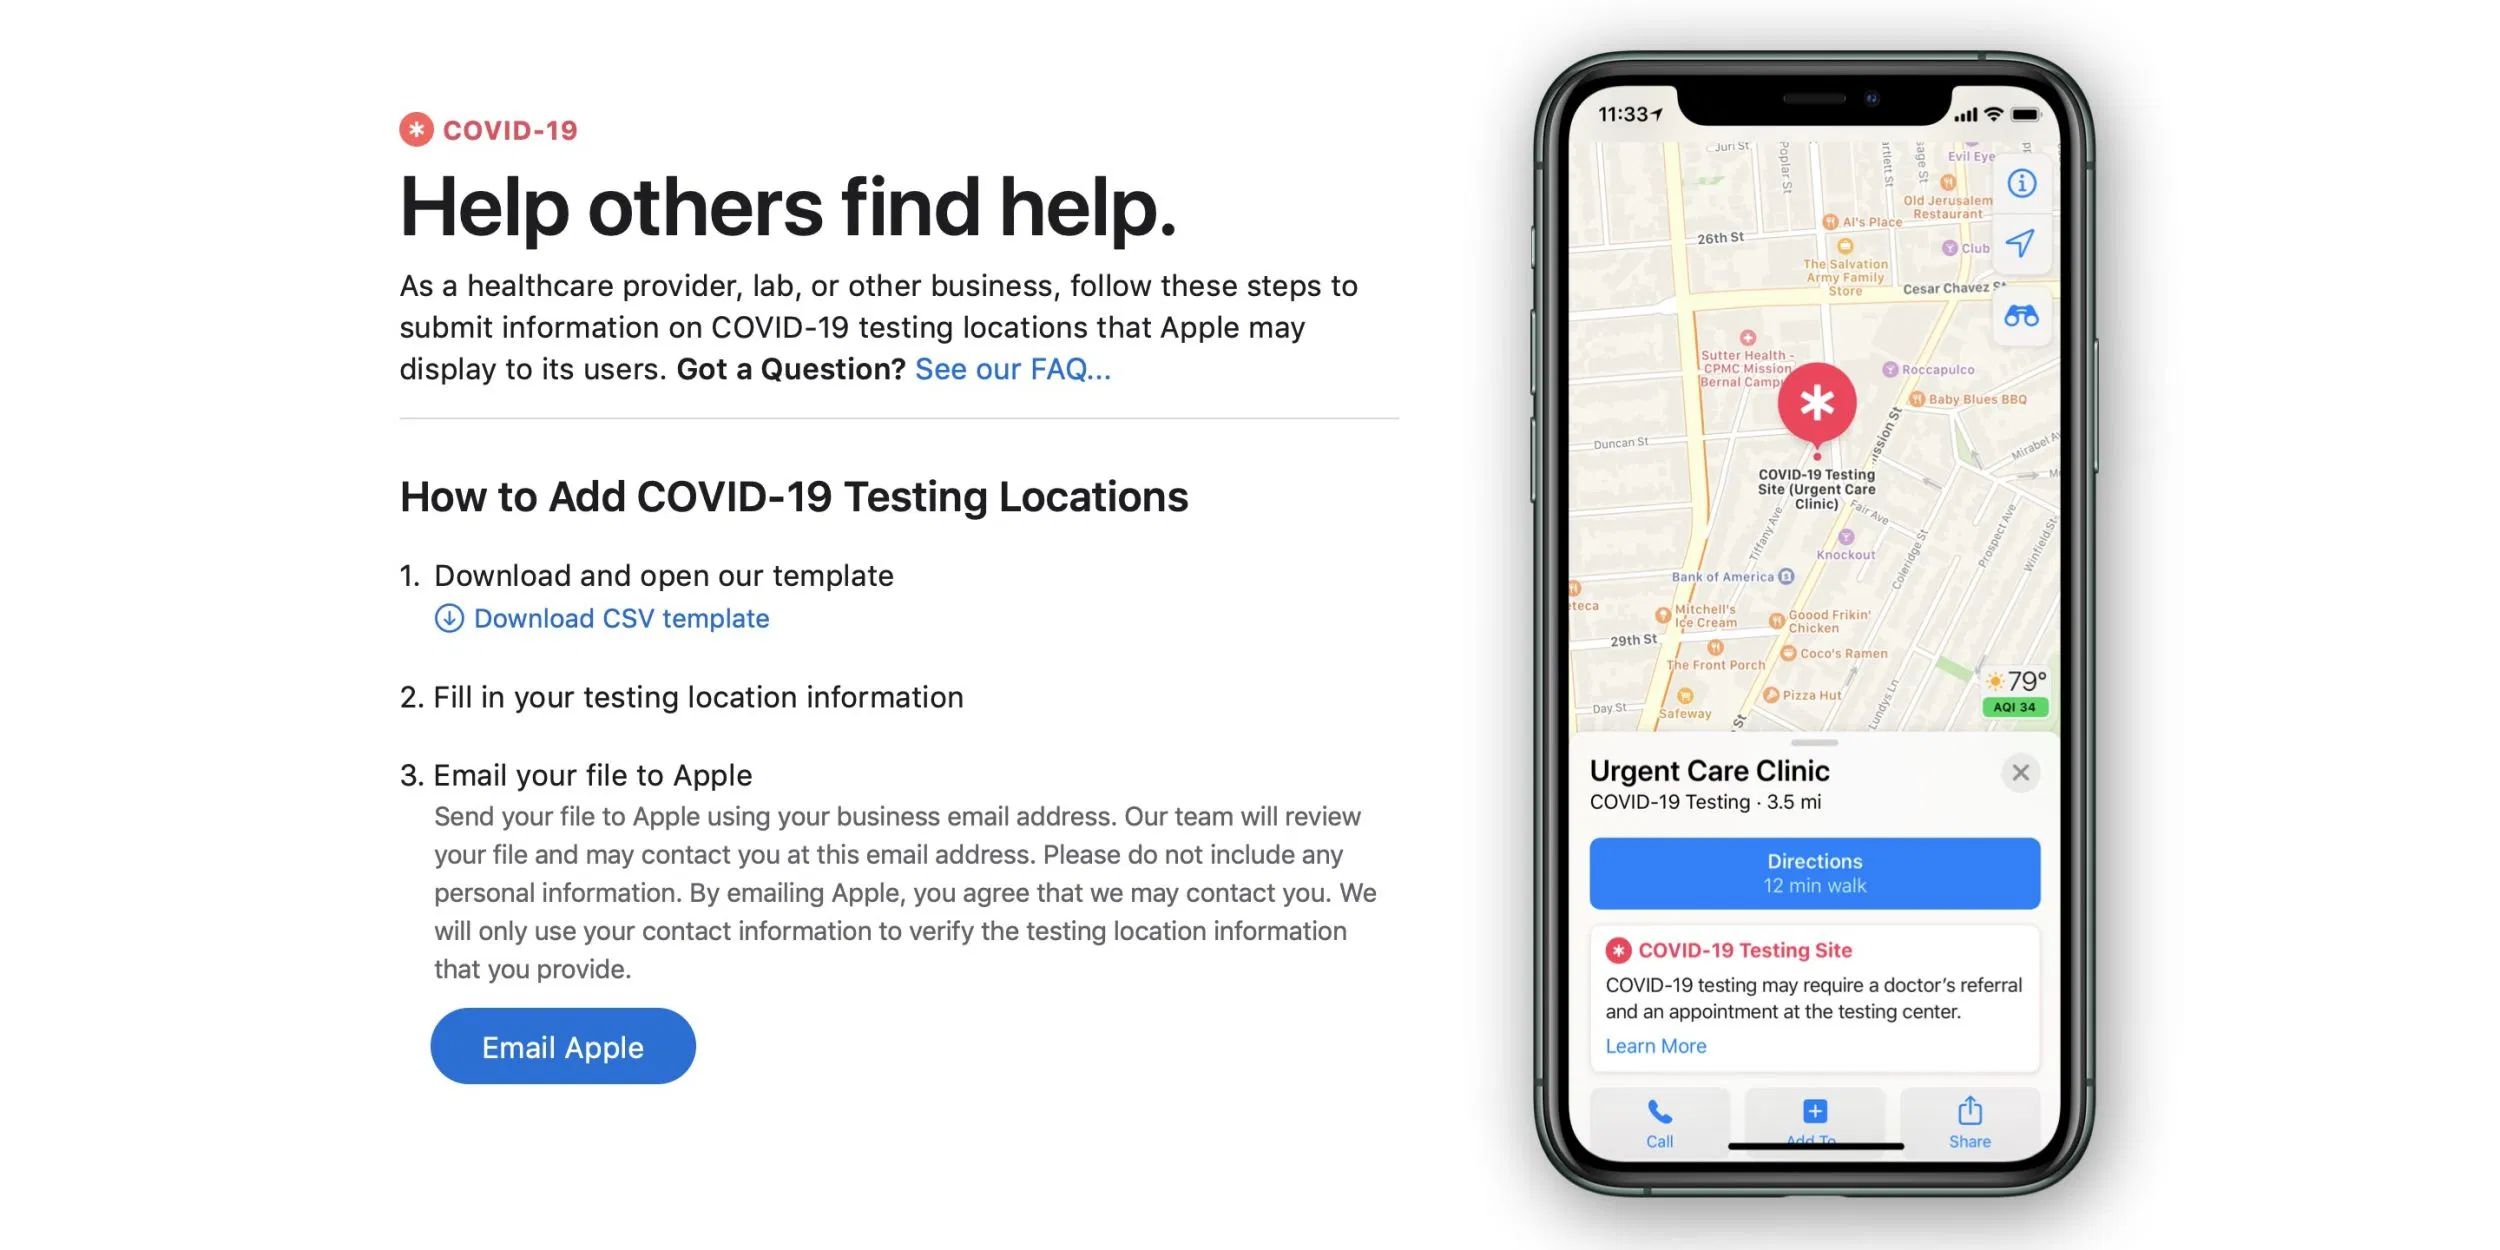 Apple Maps Will Soon Display COVID-19 Testing Locations